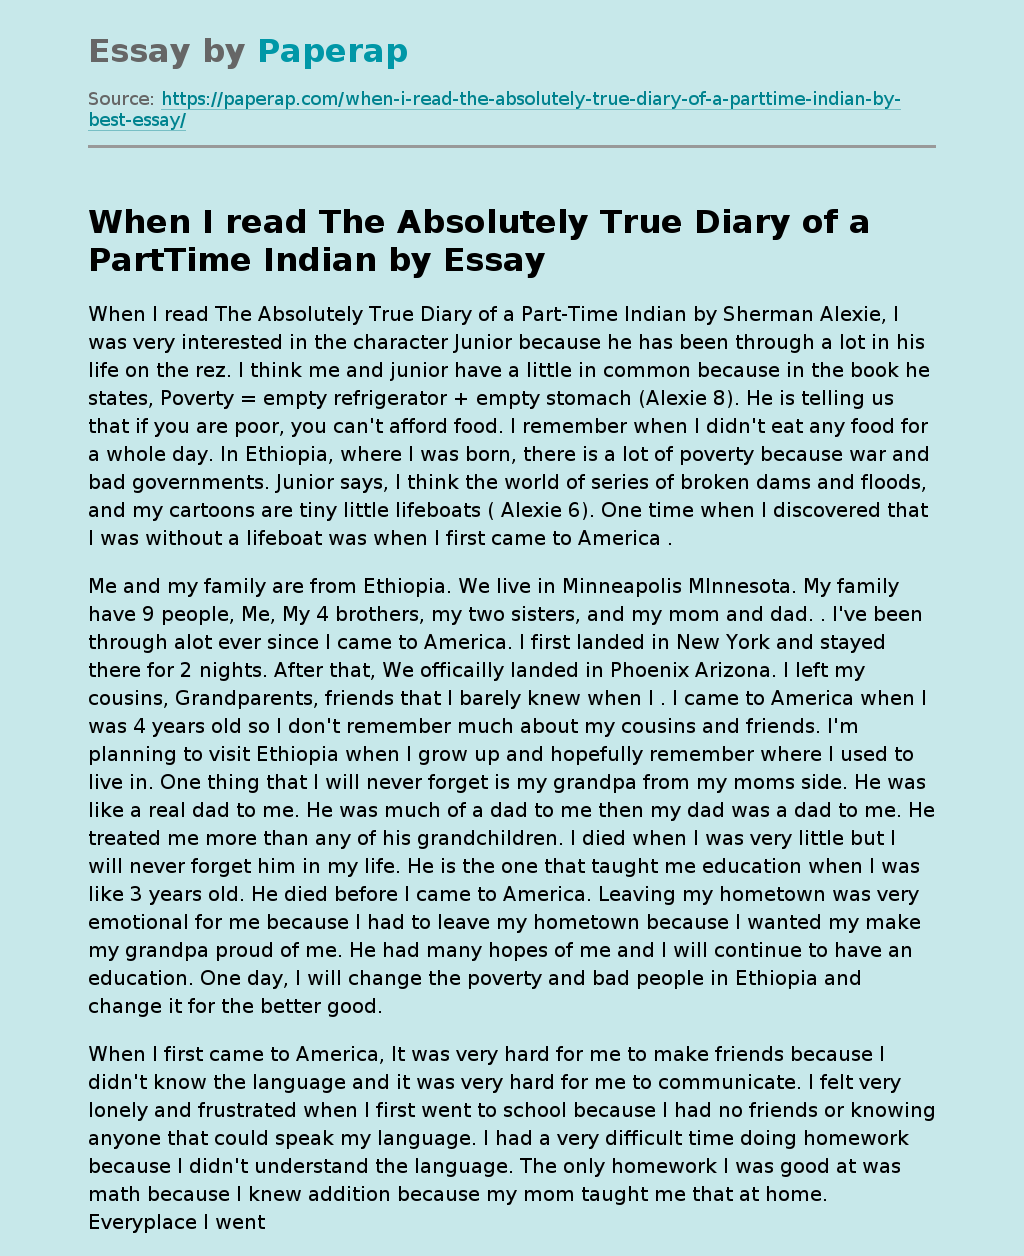 "The Absolutely True Diary of a PartTime Indian"